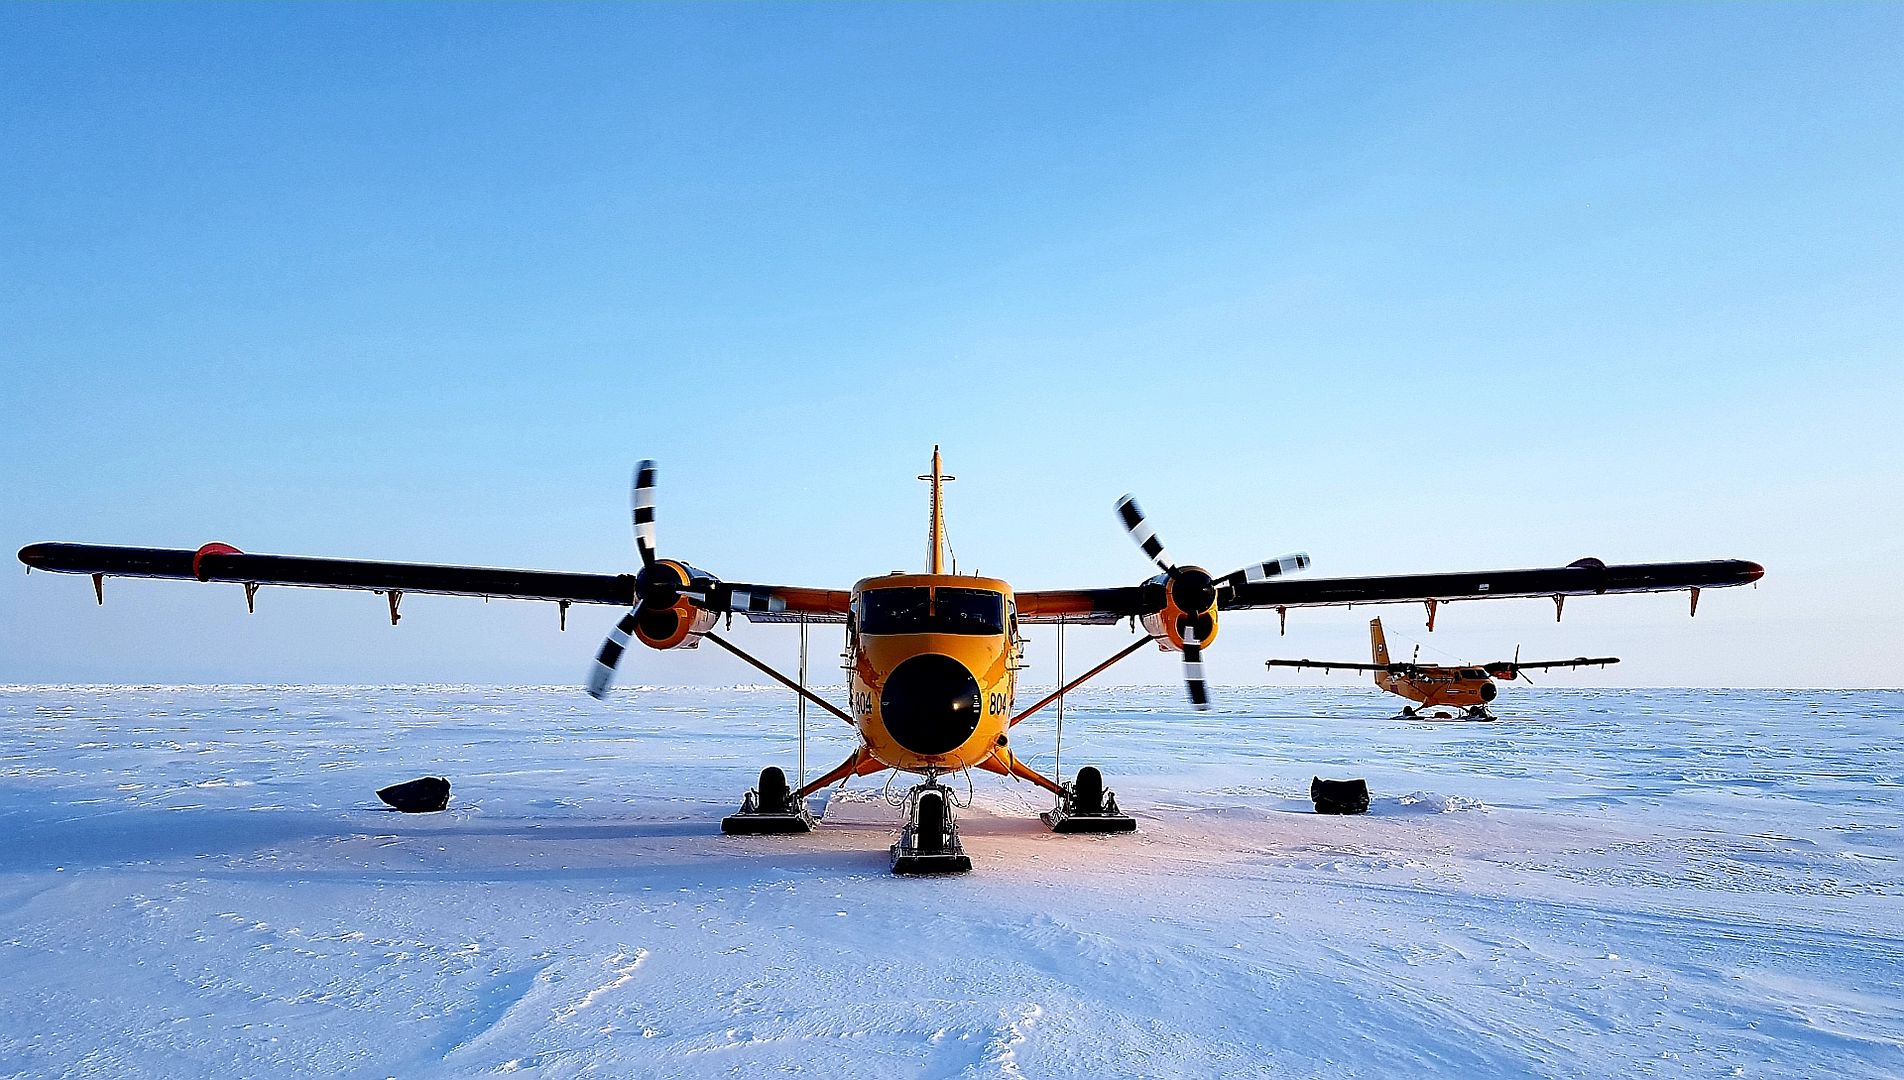 138 Twin Otters Start Their Engines On A Cold Morning North Of Deadhorse Alaska During ARCEX 21